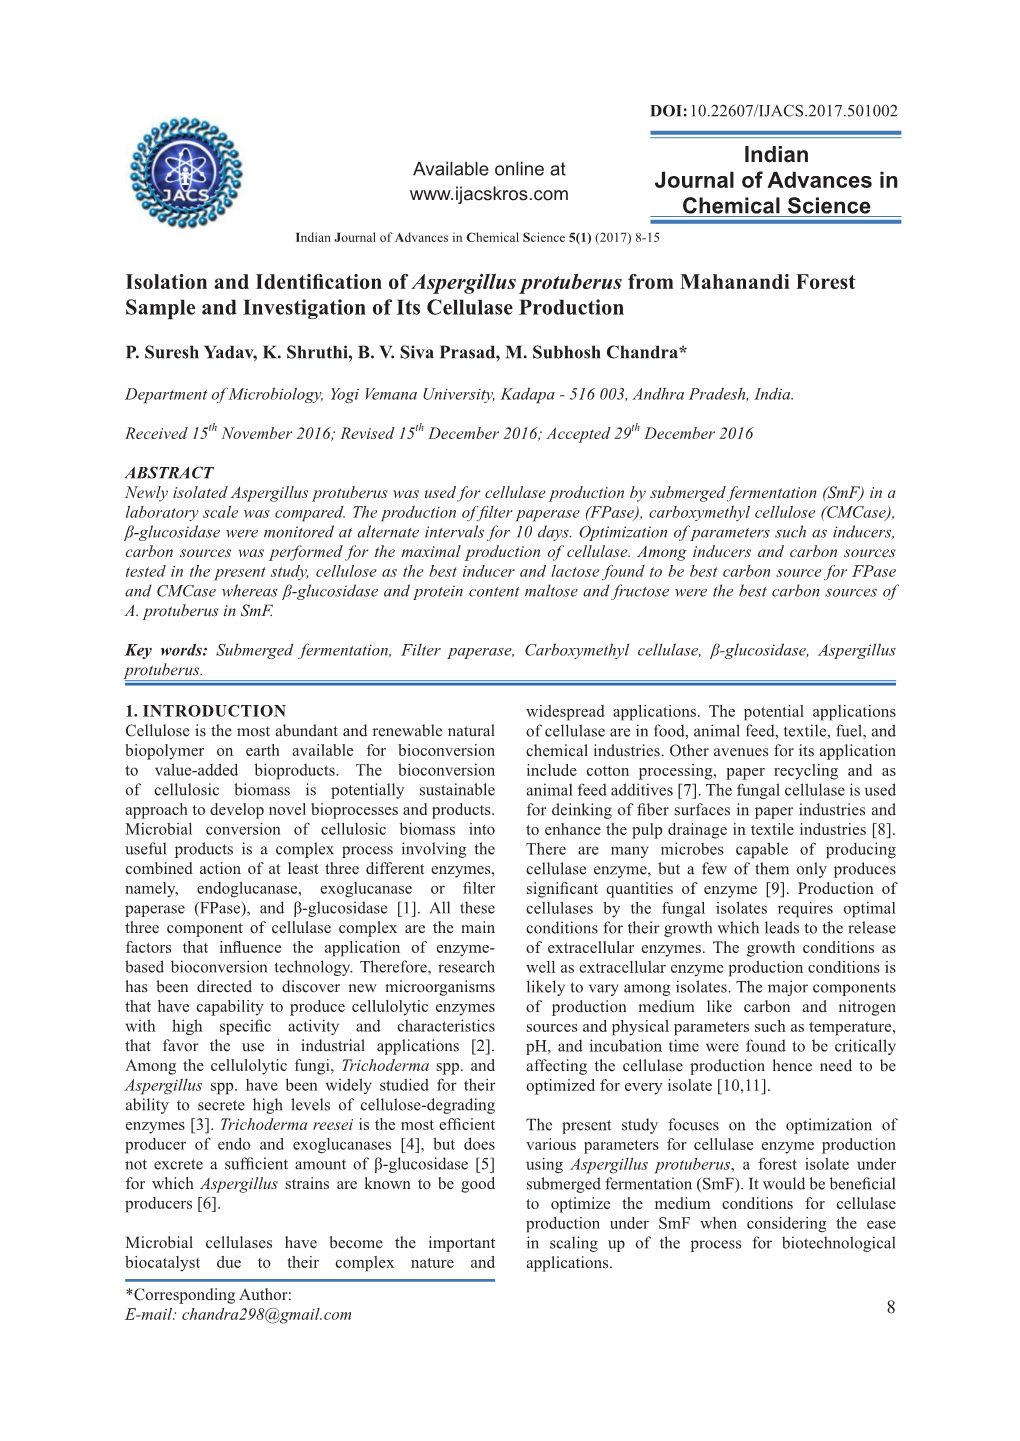 Isolation and Identification of Aspergillus Protuberus from Mahanandi Forest Sample and Investigation of Its Cellulase Production